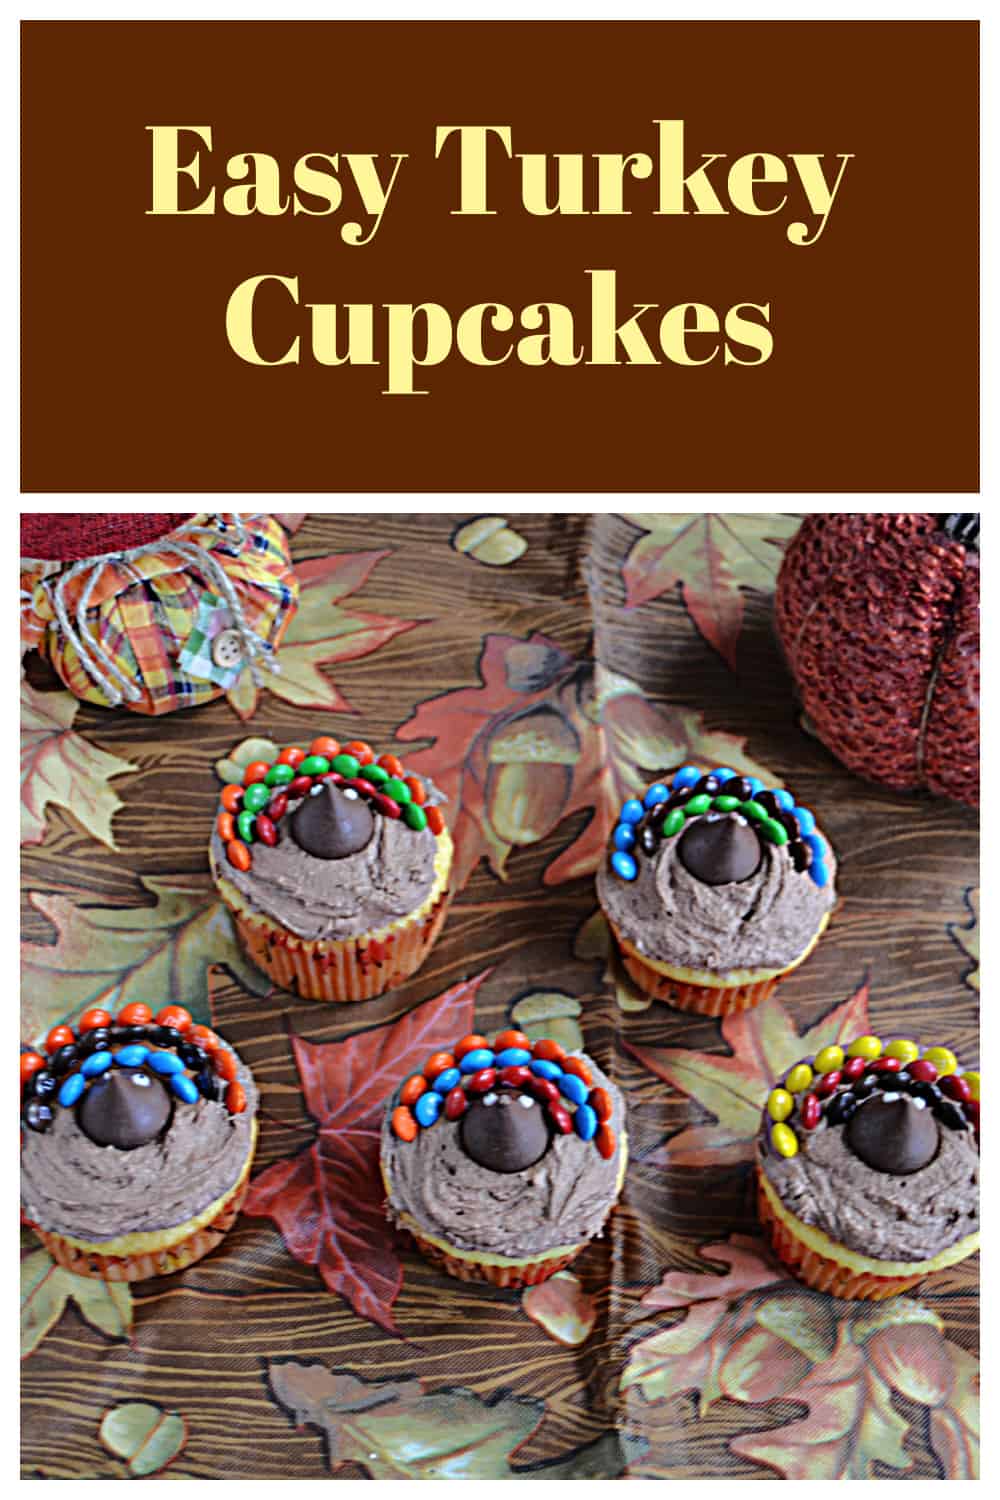 Pin Image: Text title, 5 turkey cupcakes on a leaf backdrop.